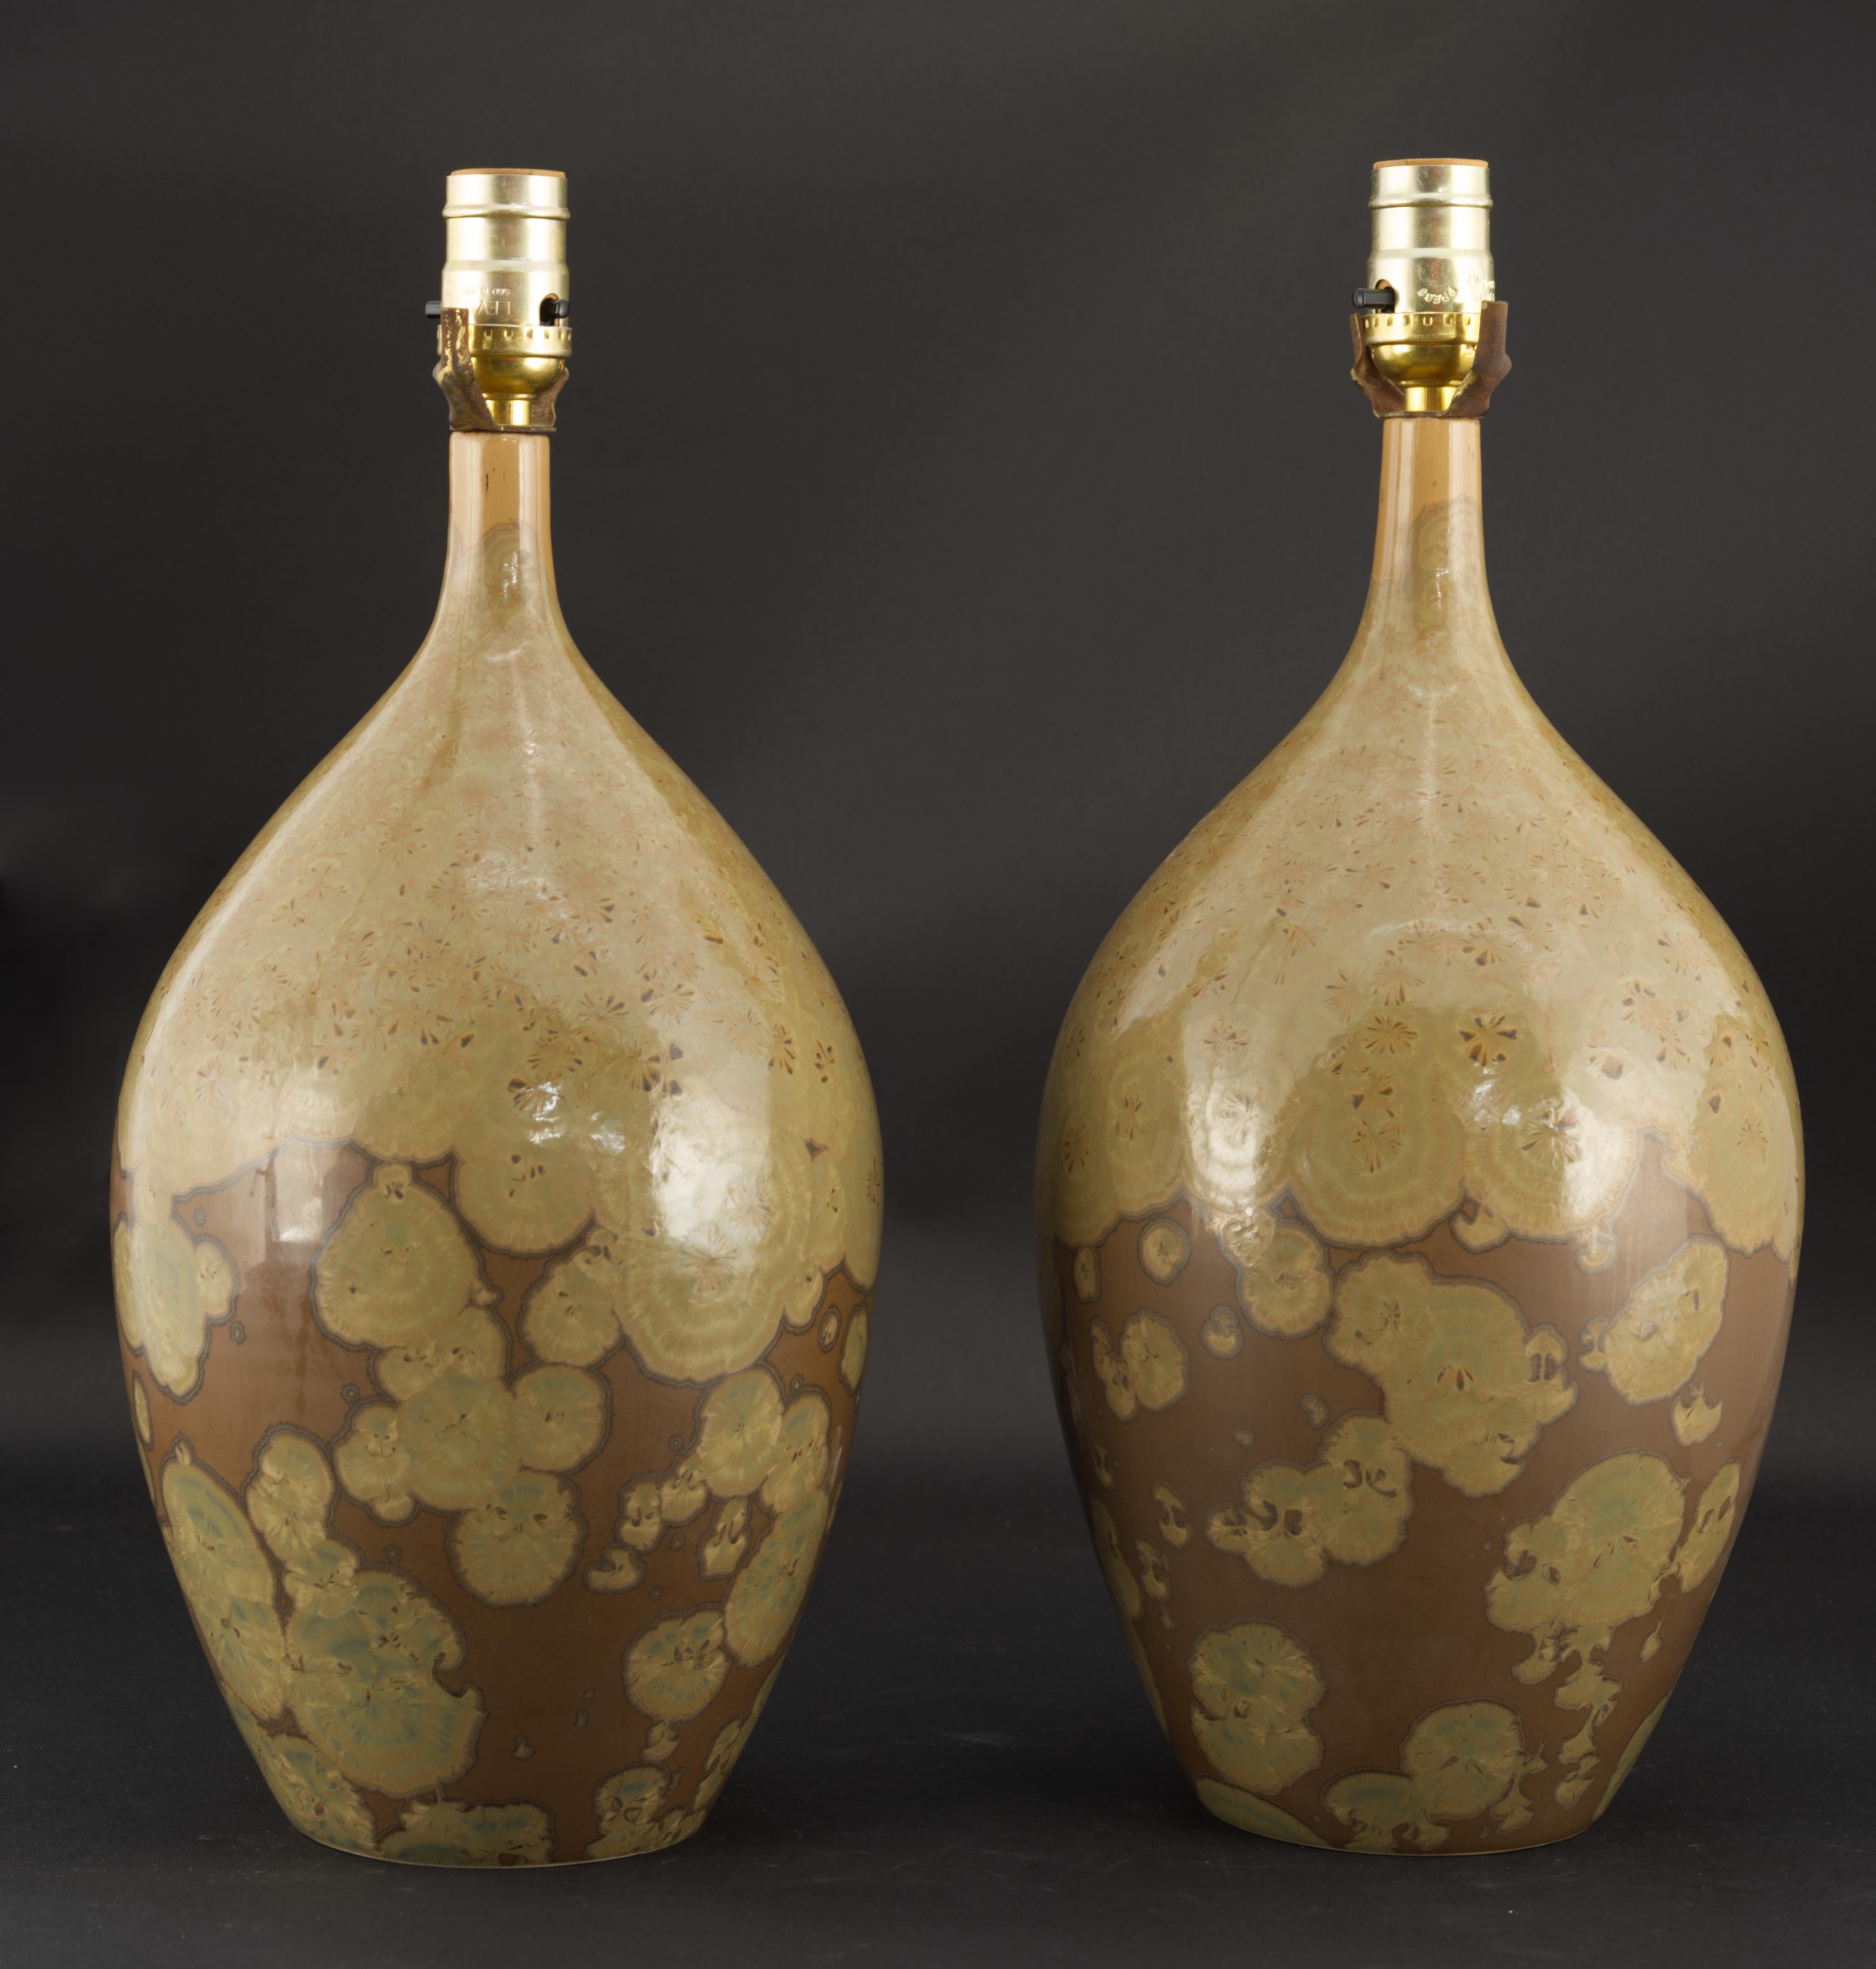 The pair of vintage studio pottery ceramic lamps is decorated with crystalline glaze in organic, earthy tones. The bodies were hand thrown on a wheel; olive color crystals on milk chocolate colored base were grown in a kiln during a very long,